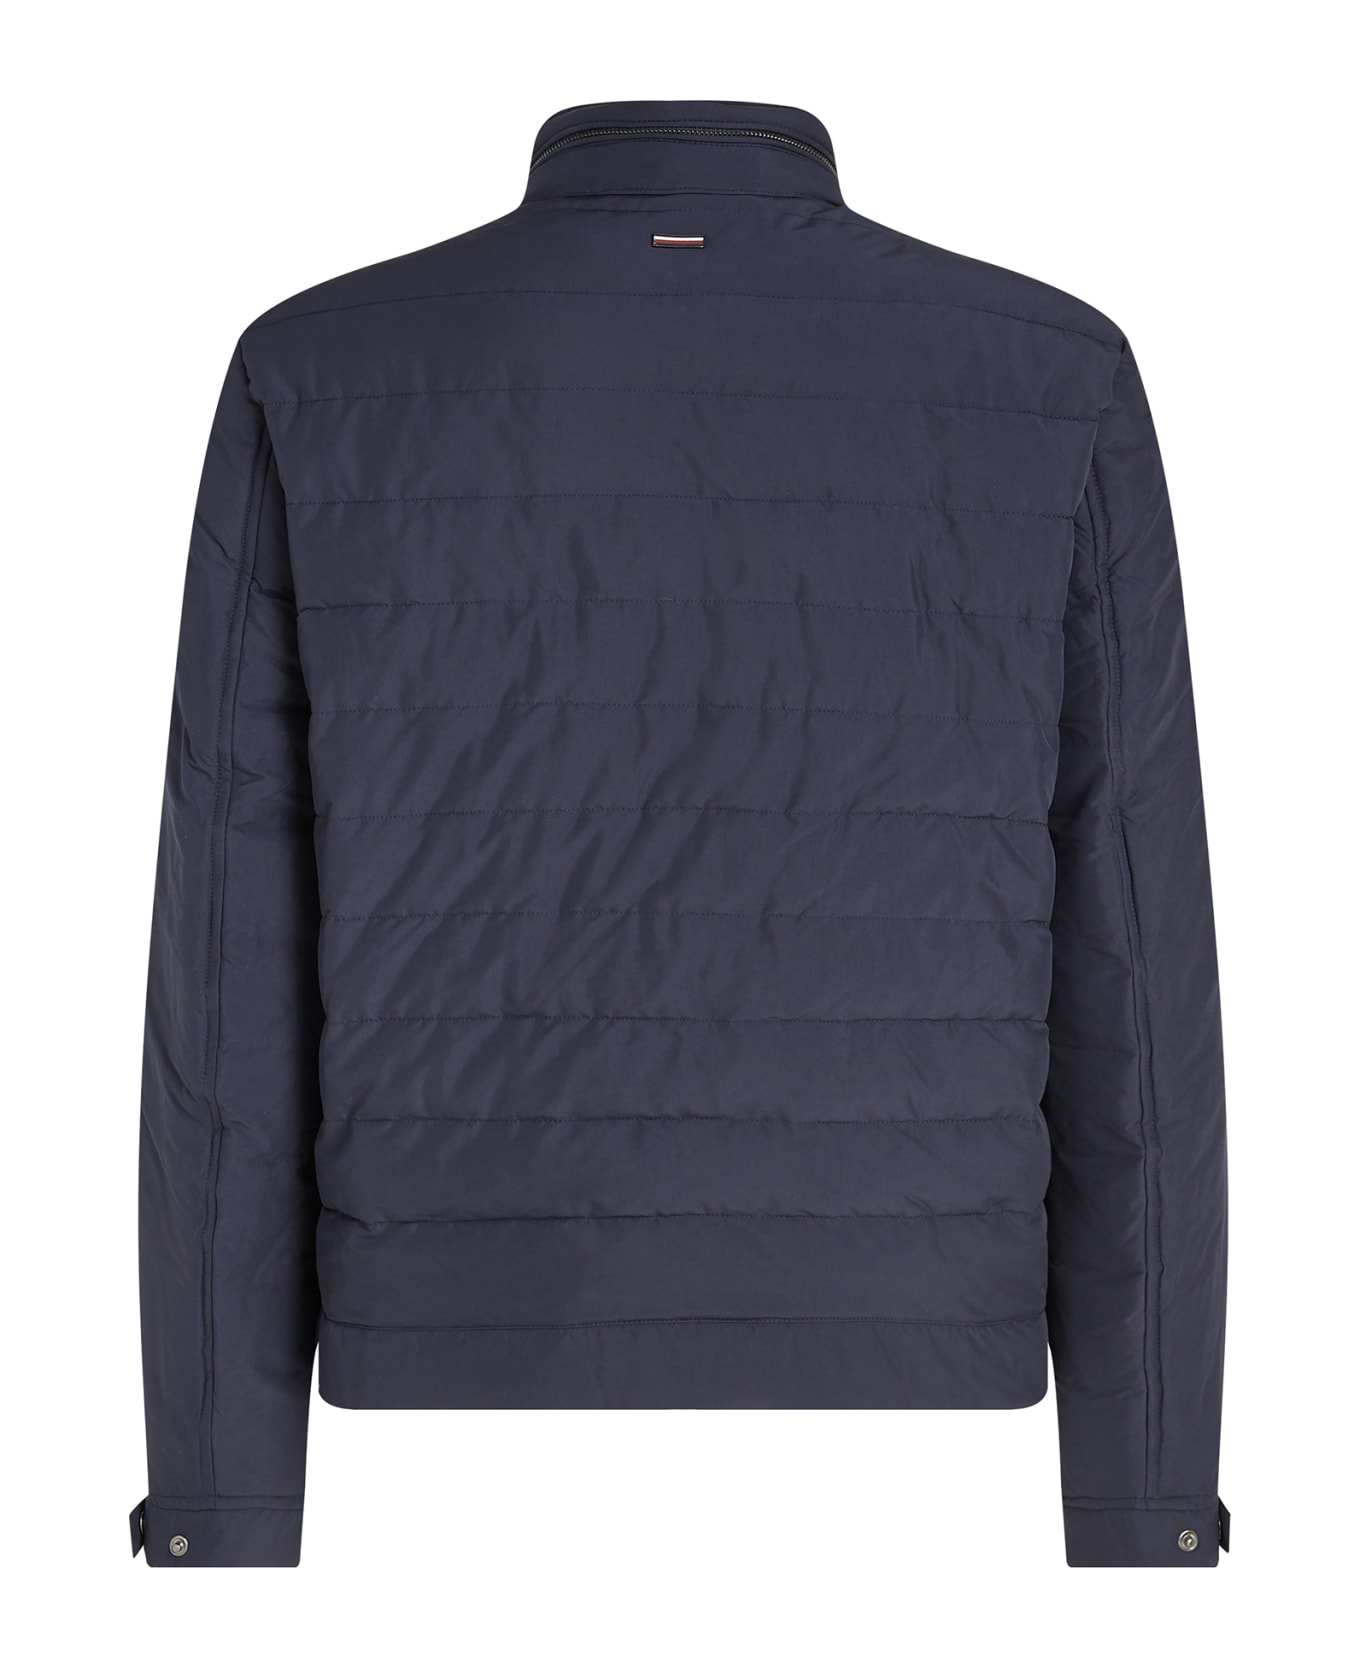 Tommy Hilfiger Racer-style Jacket With Full Zip - DESERT SKY